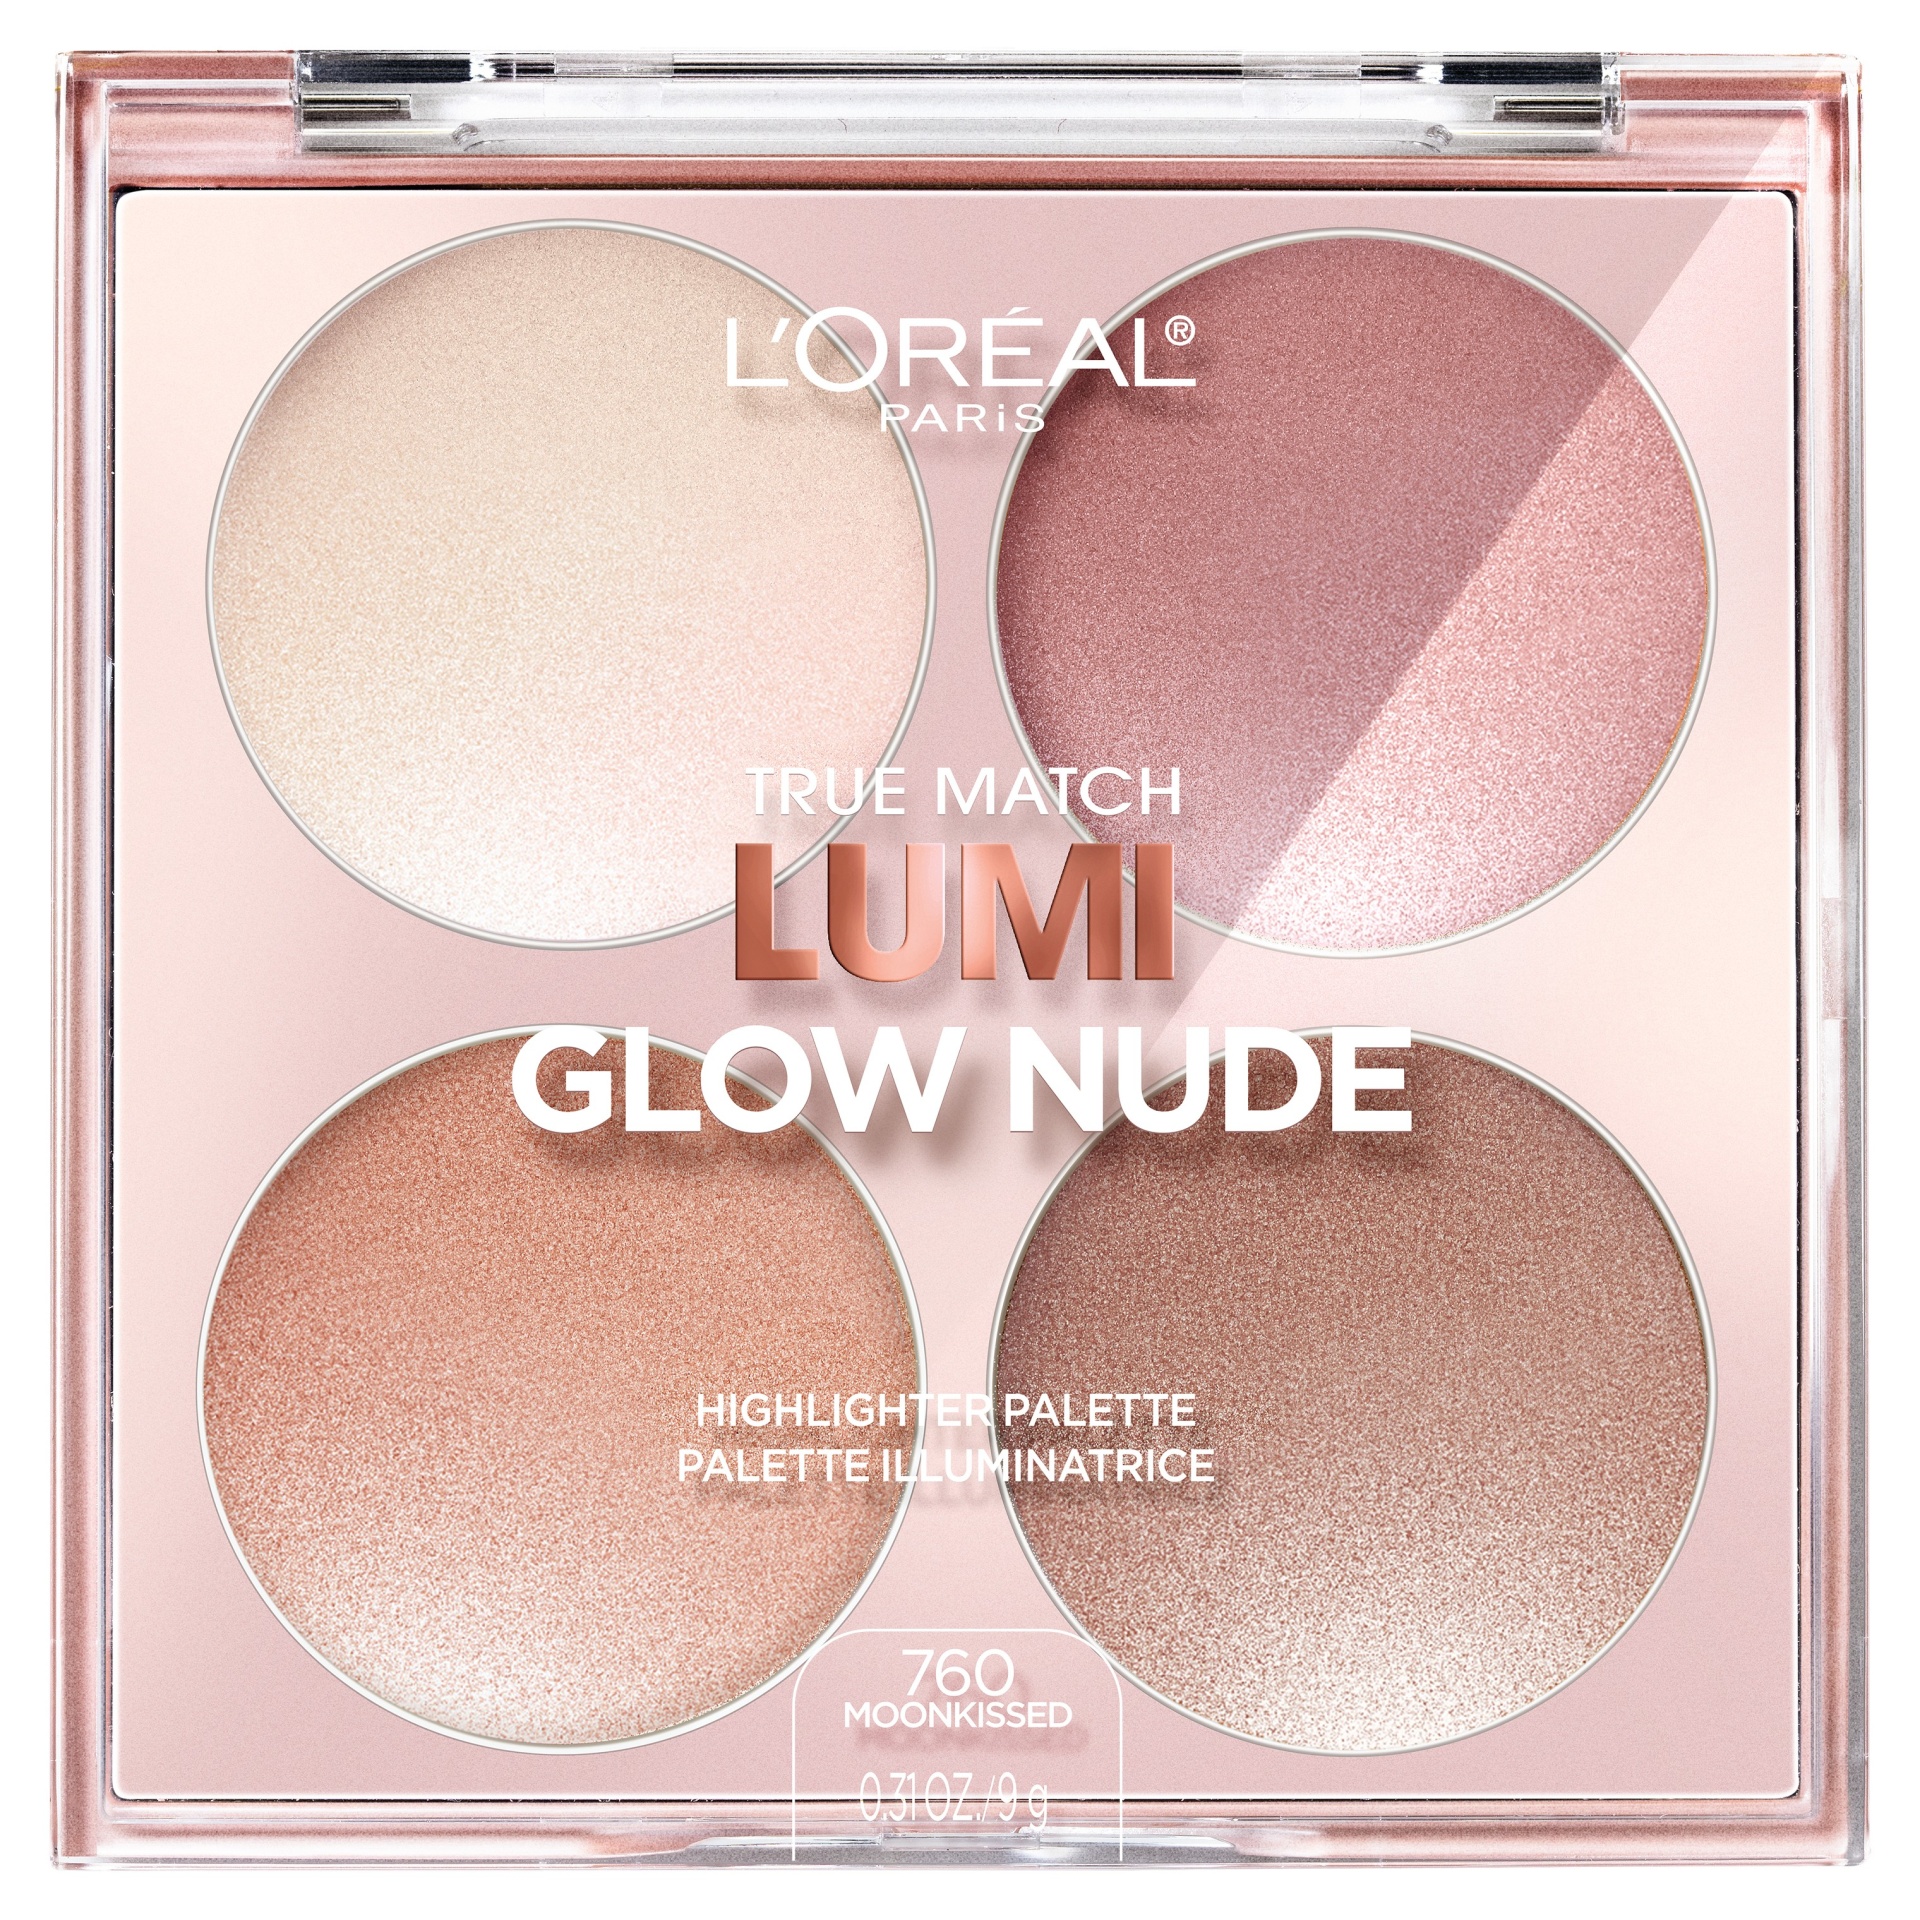 slide 1 of 2, L'Oréal True Match Lumi Glow Nude Highlighter Palette 760 Moonkissed, 1 ct